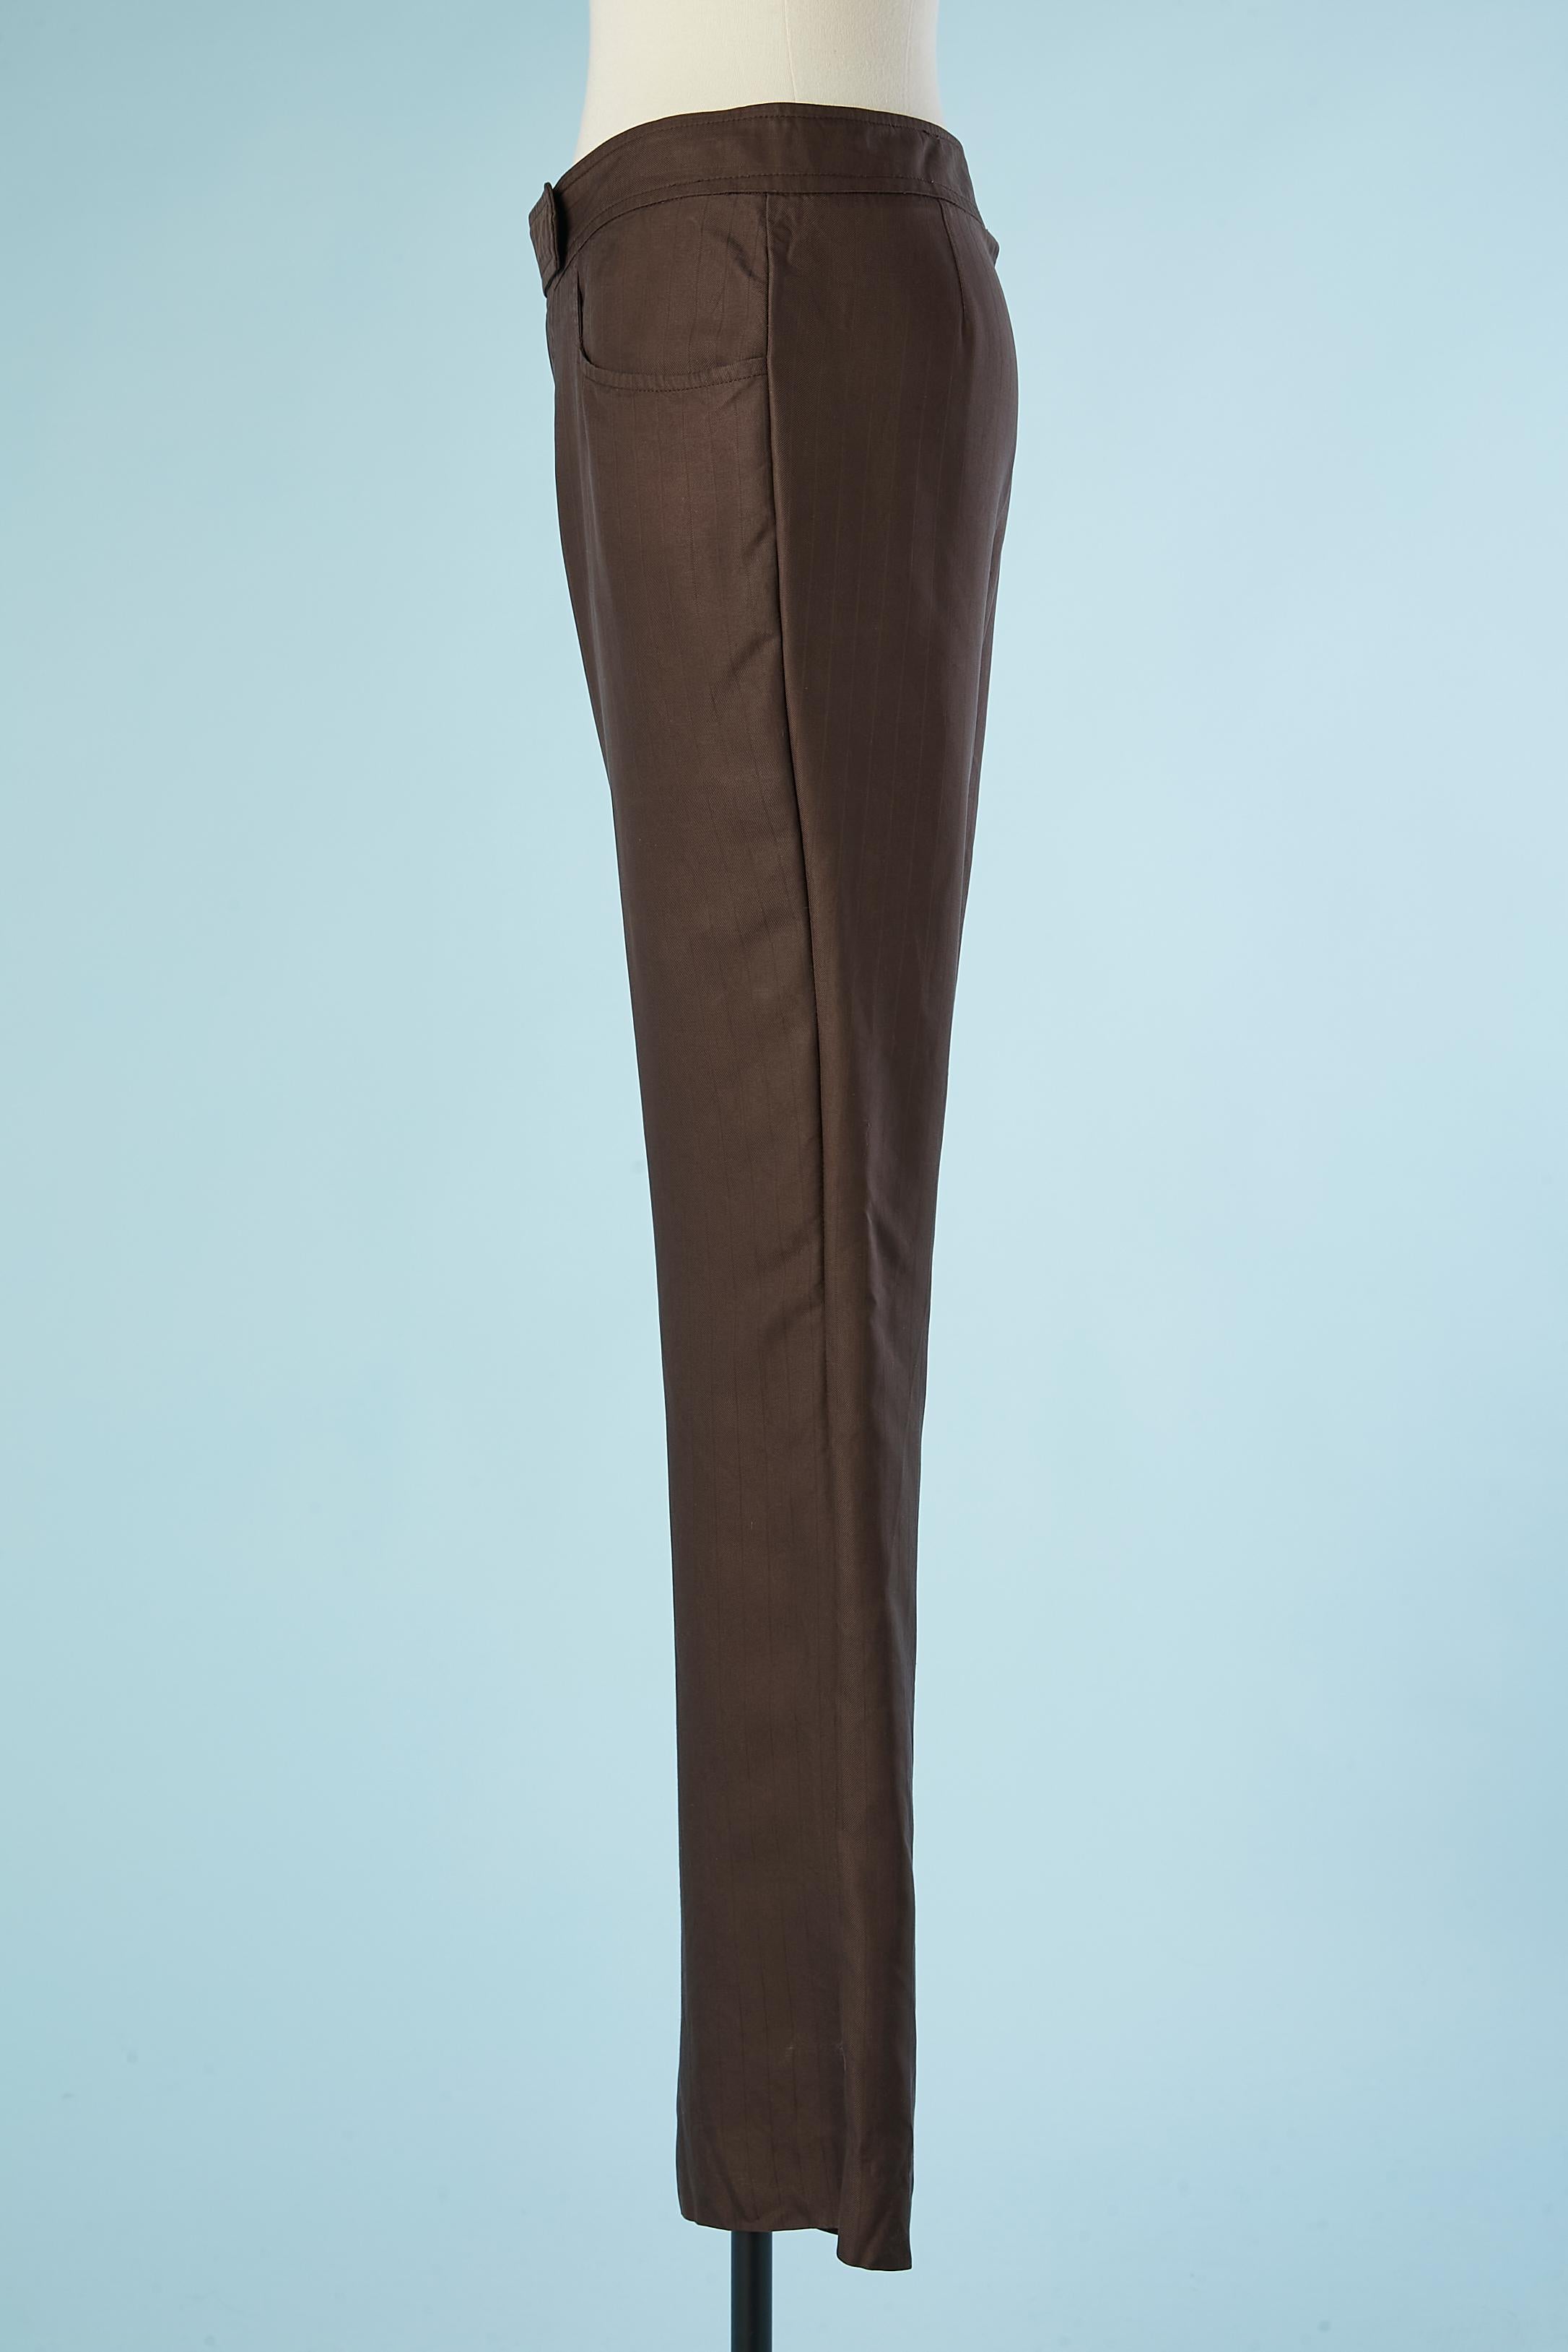 Brown pin-striped silk pant Gucci  In Excellent Condition For Sale In Saint-Ouen-Sur-Seine, FR